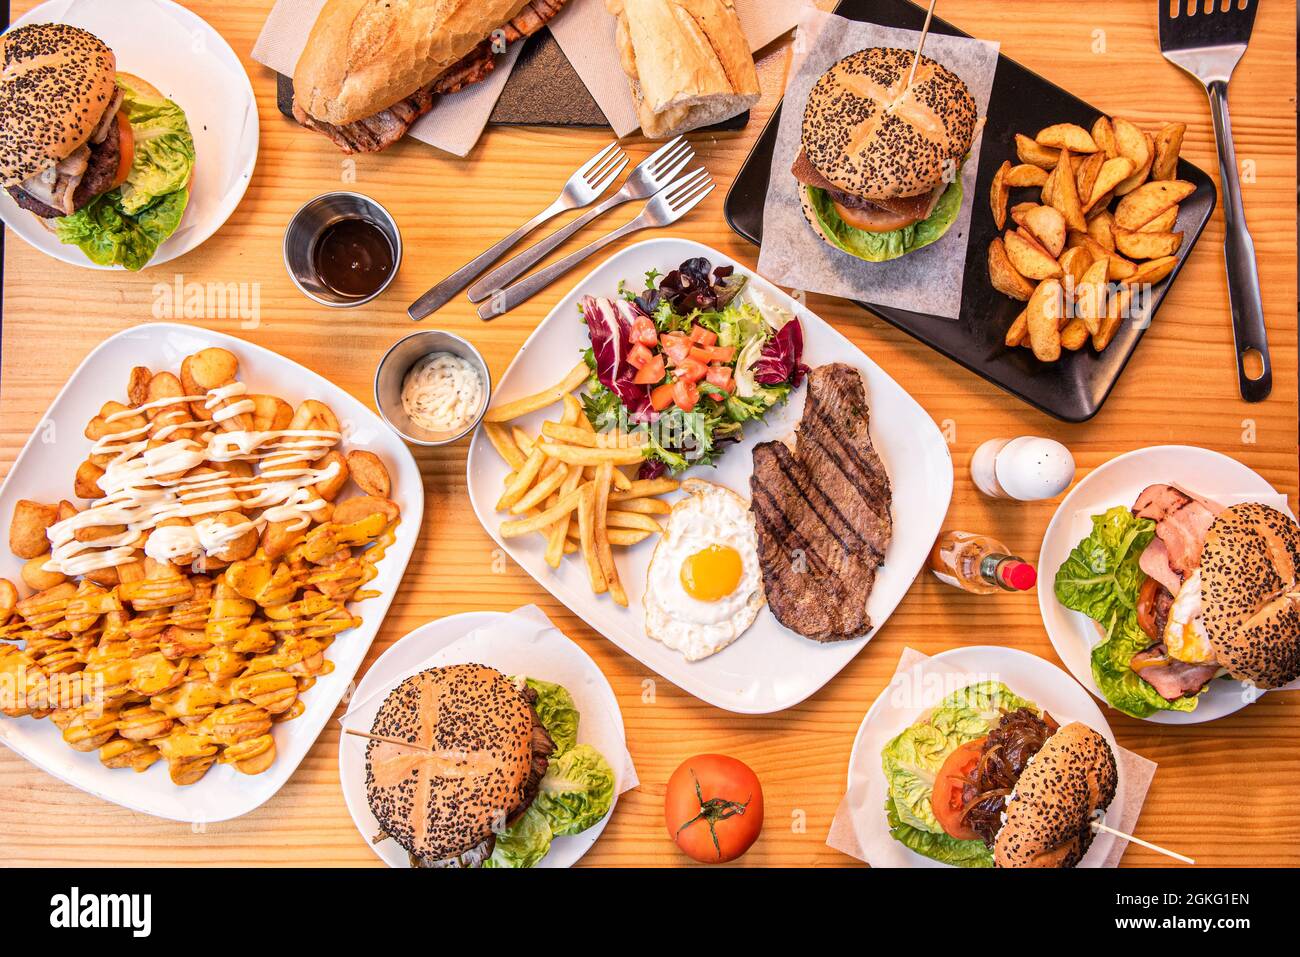 Set of popular Spanish dishes and hamburgers on wooden table. Loin and cheese sandwich, steak and egg, patatas bravas, fresh tomatoes, forks, deluxe p Stock Photo